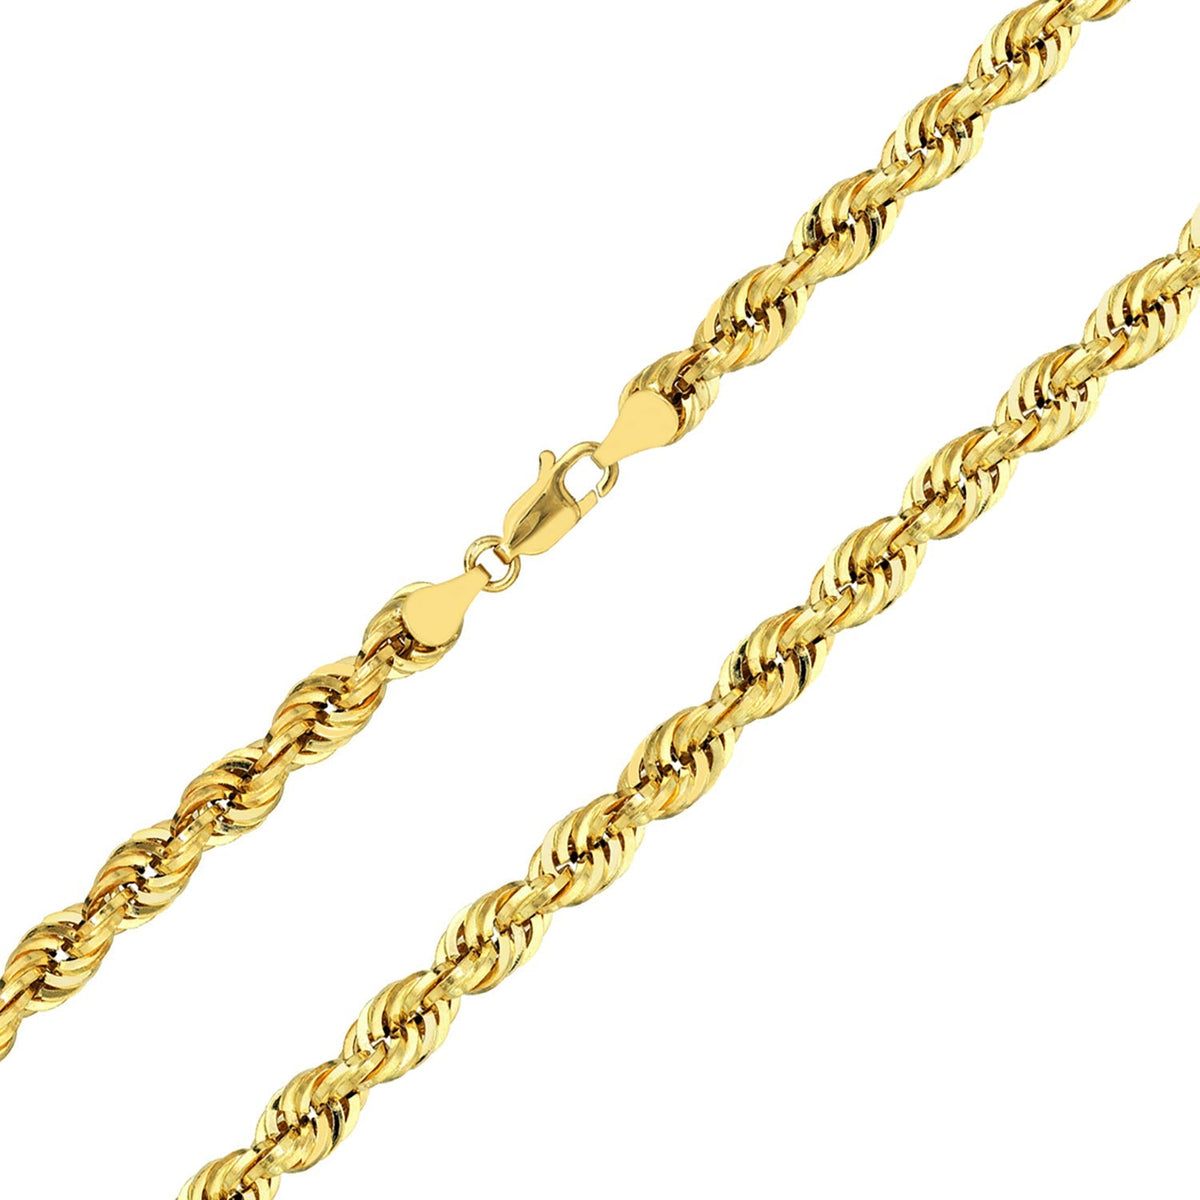 14k Yellow Gold Hollow 7mm Rope Chain Necklace with Lobster Lock - Light Rope Chain with Diamond Cut